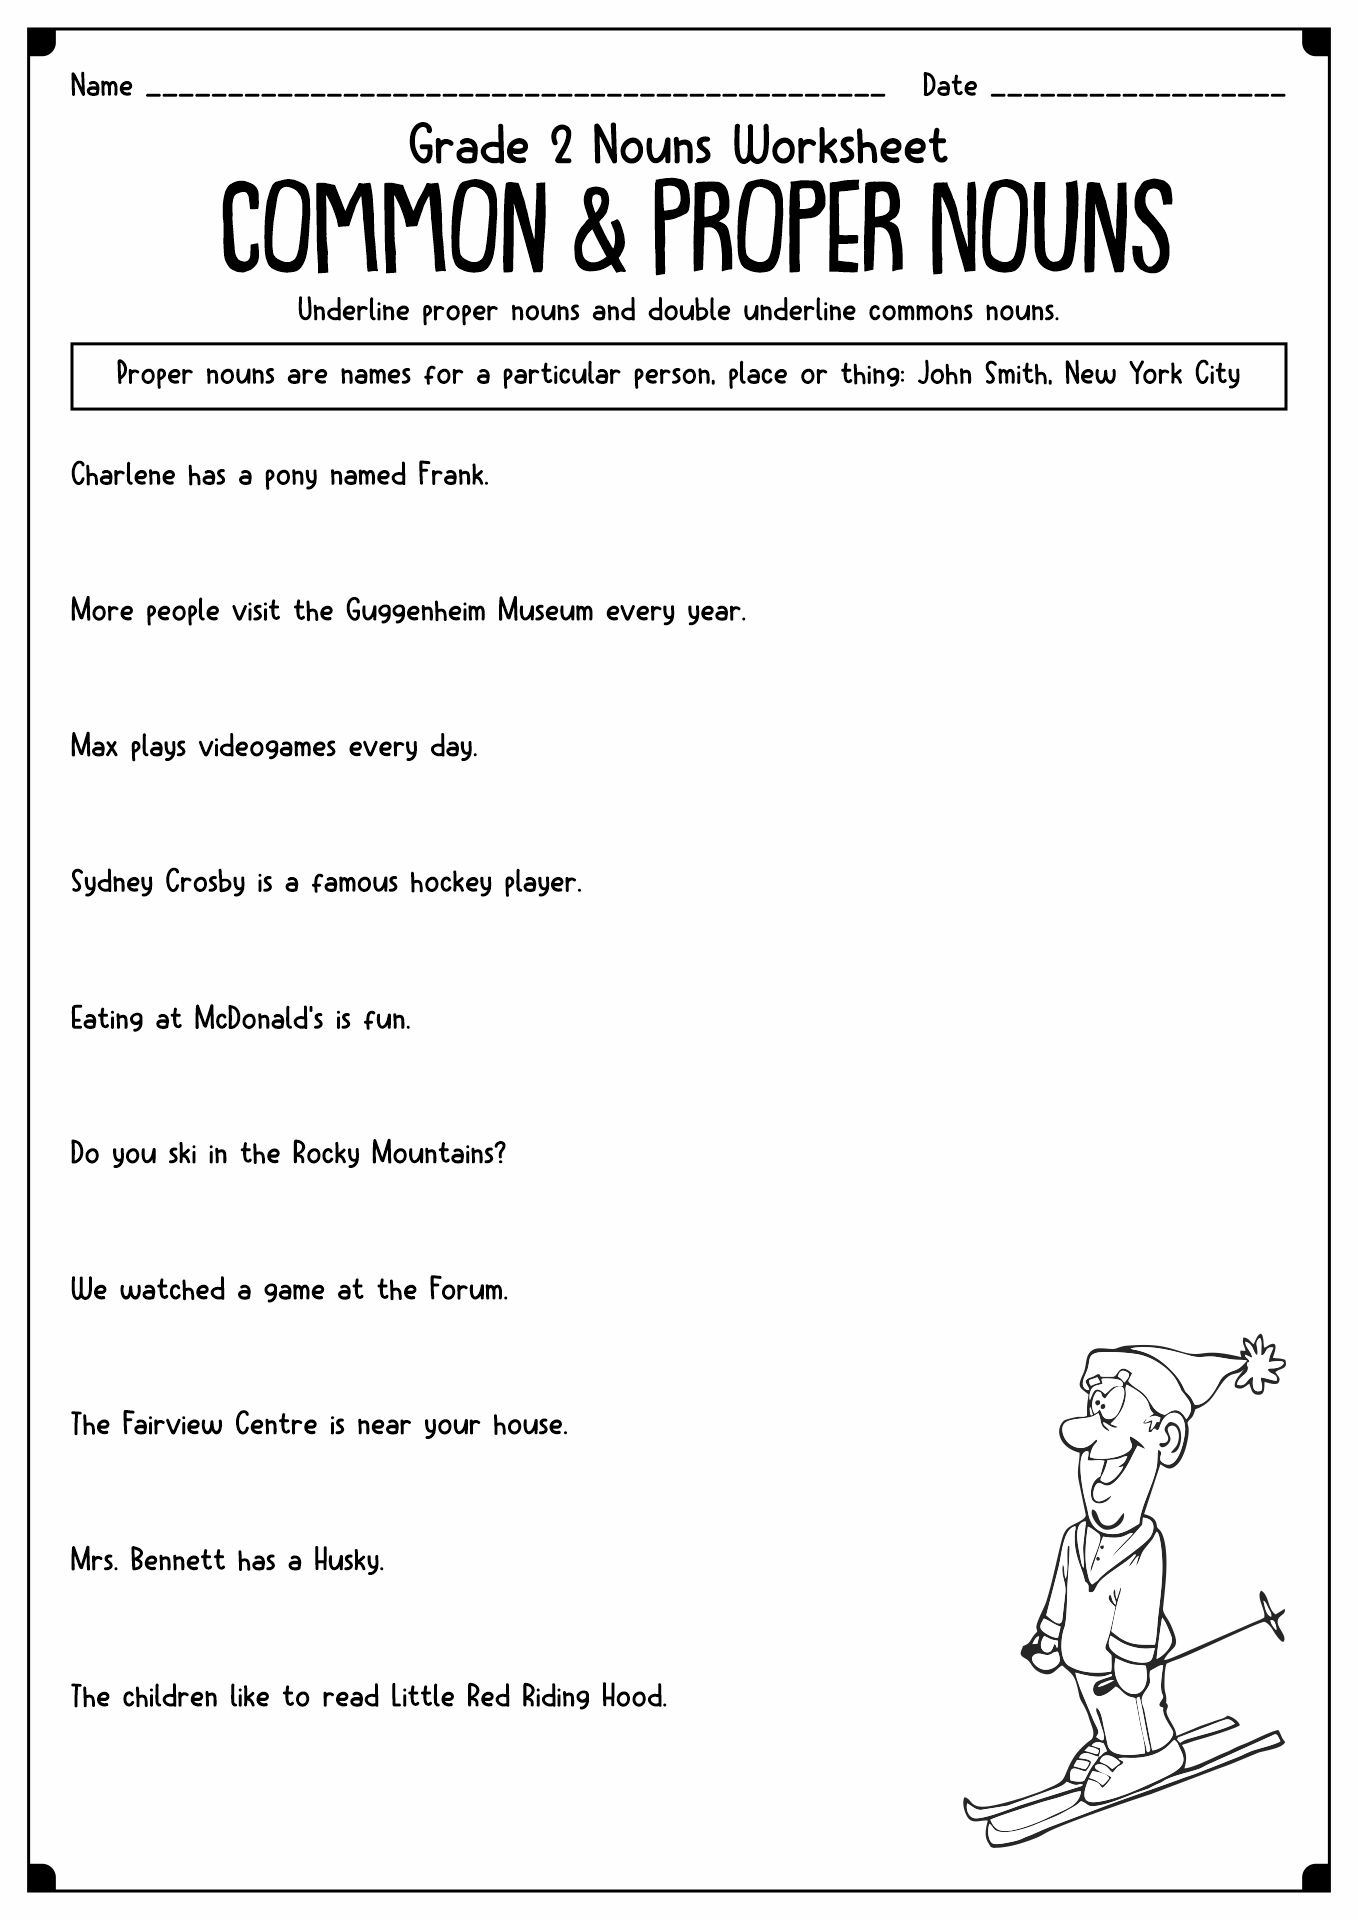 18 Best Images Of Proper Noun Worksheets For First Grade Common And Proper Nouns Worksheets 